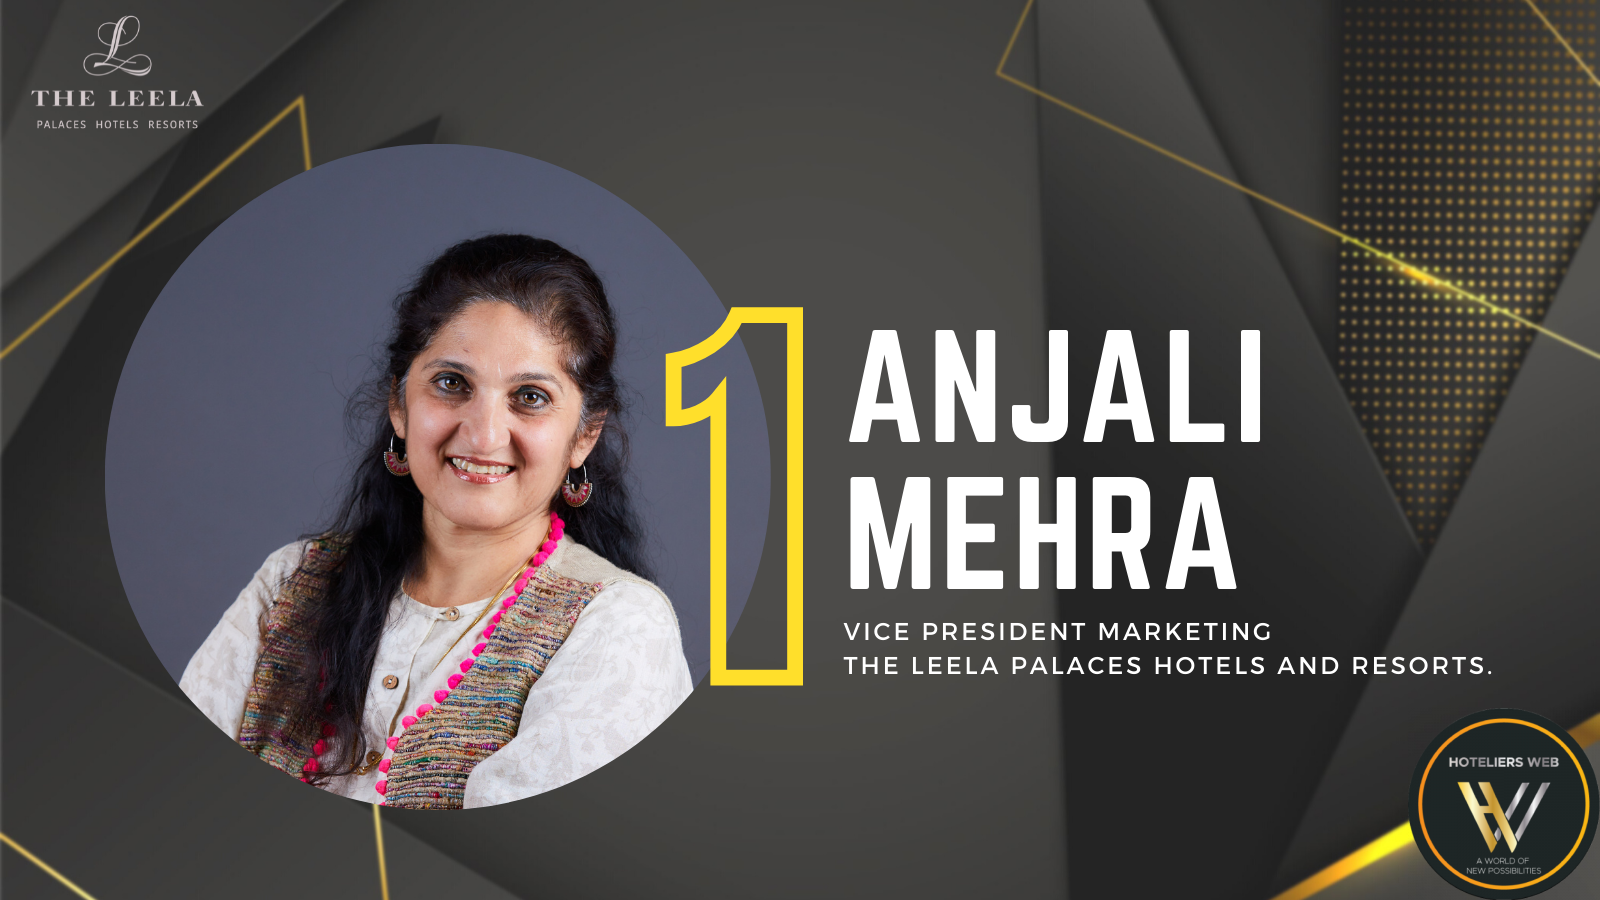 Anjali Mehra – Ranked 1 on Power 25 Marketing & PR 2021 by Hoteliers Web